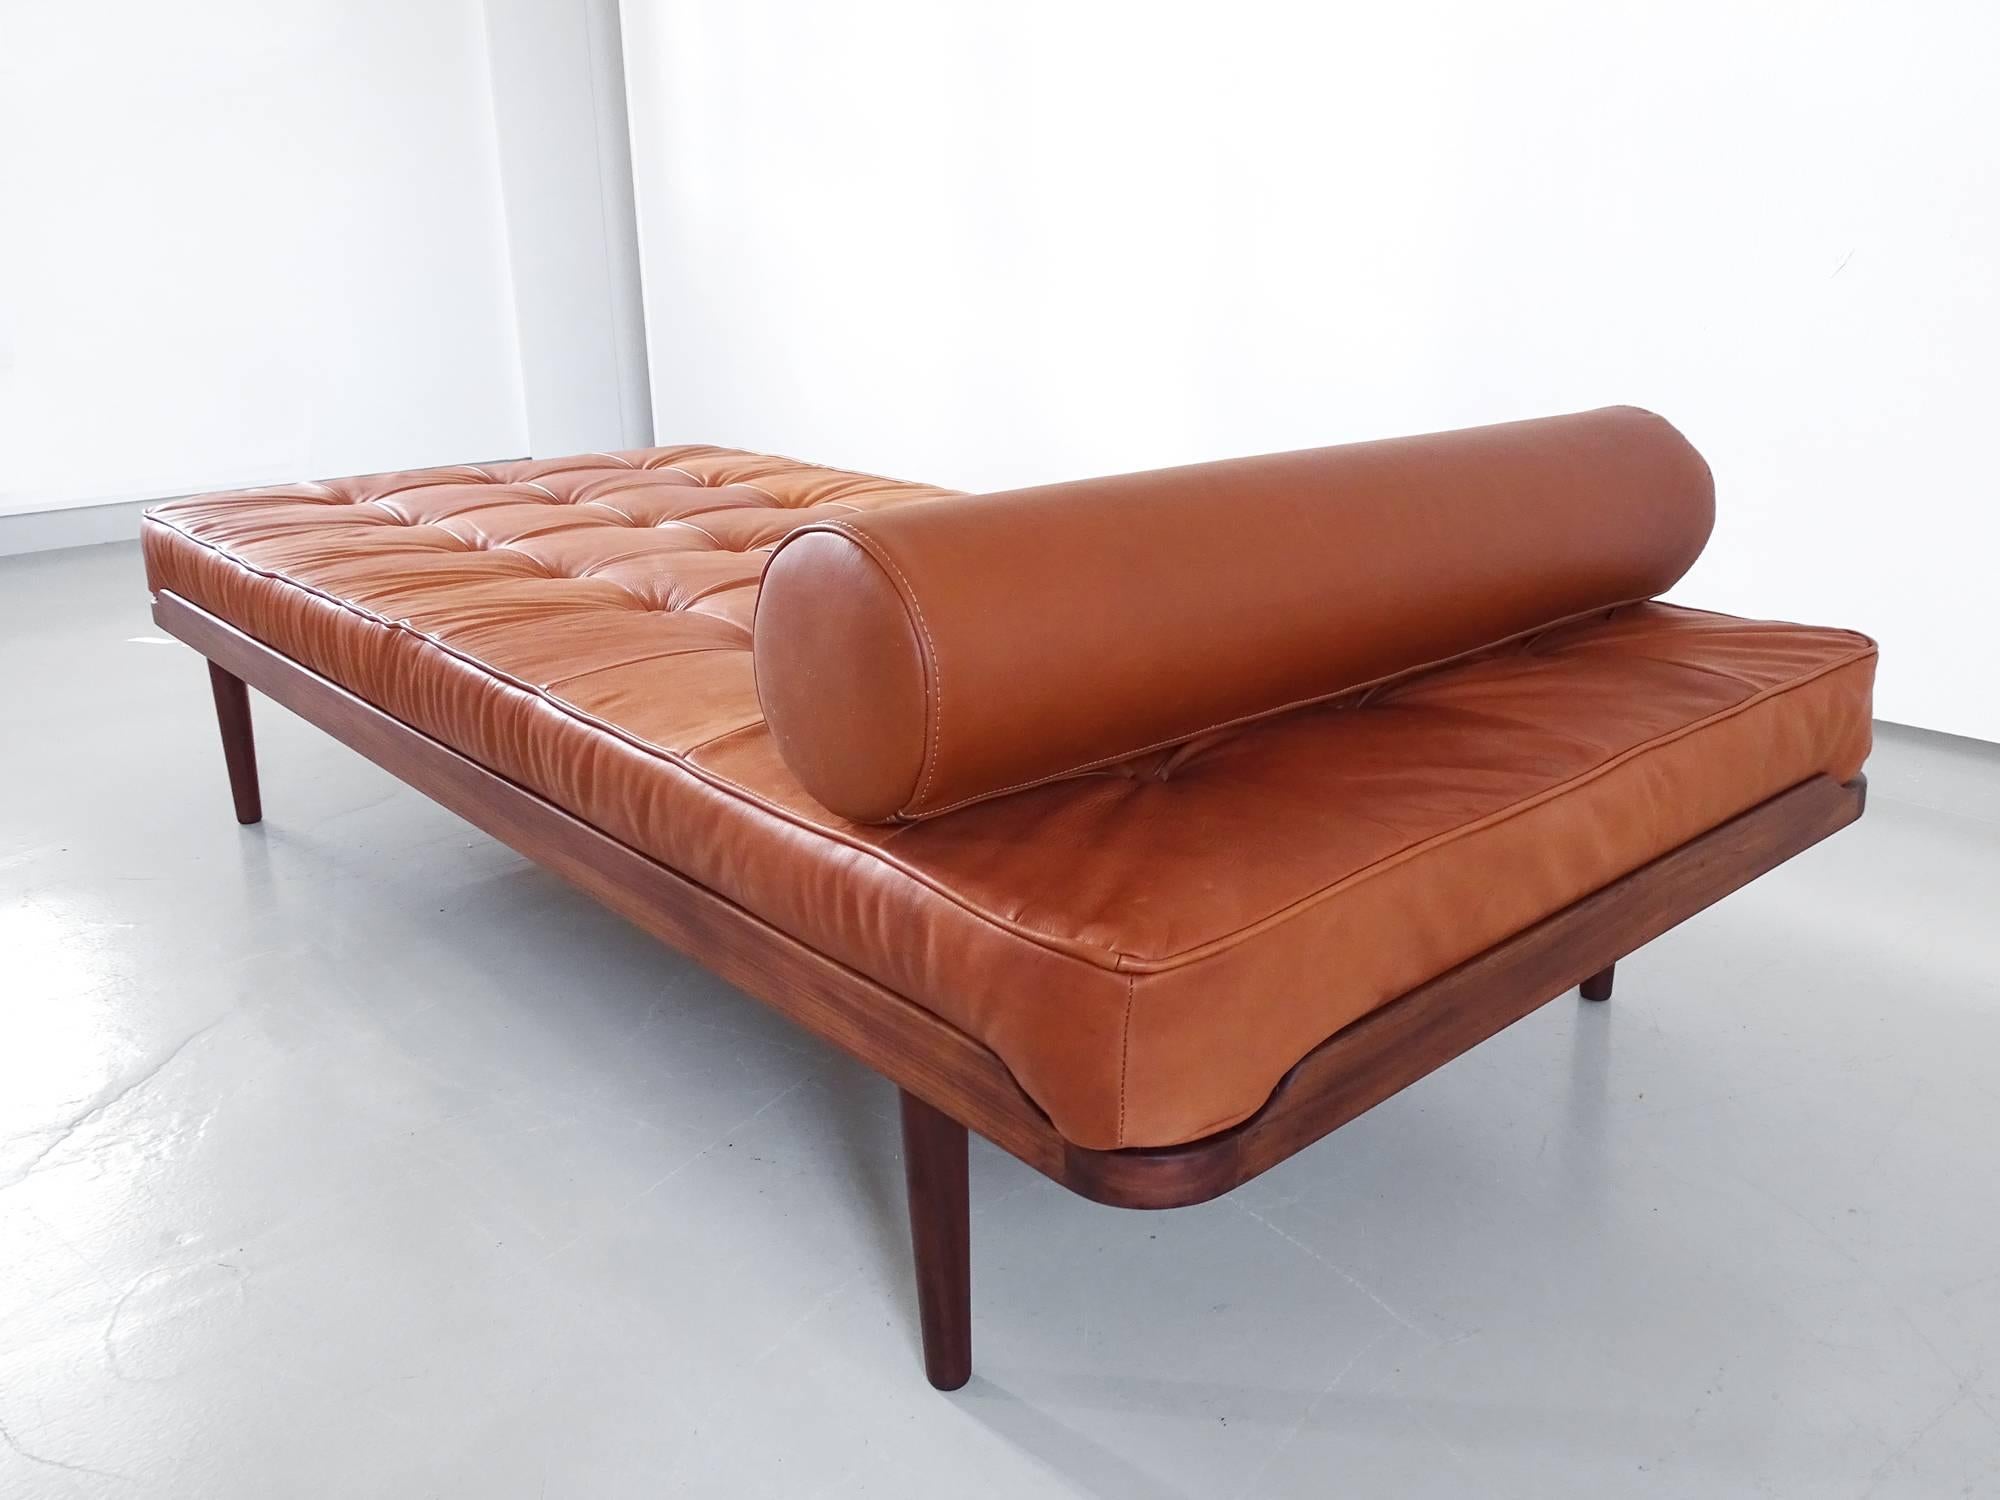 Grete Jalk Daybed in Teak and Cognac Leather for P. Jeppesen, Denmark, 1960 For Sale 1